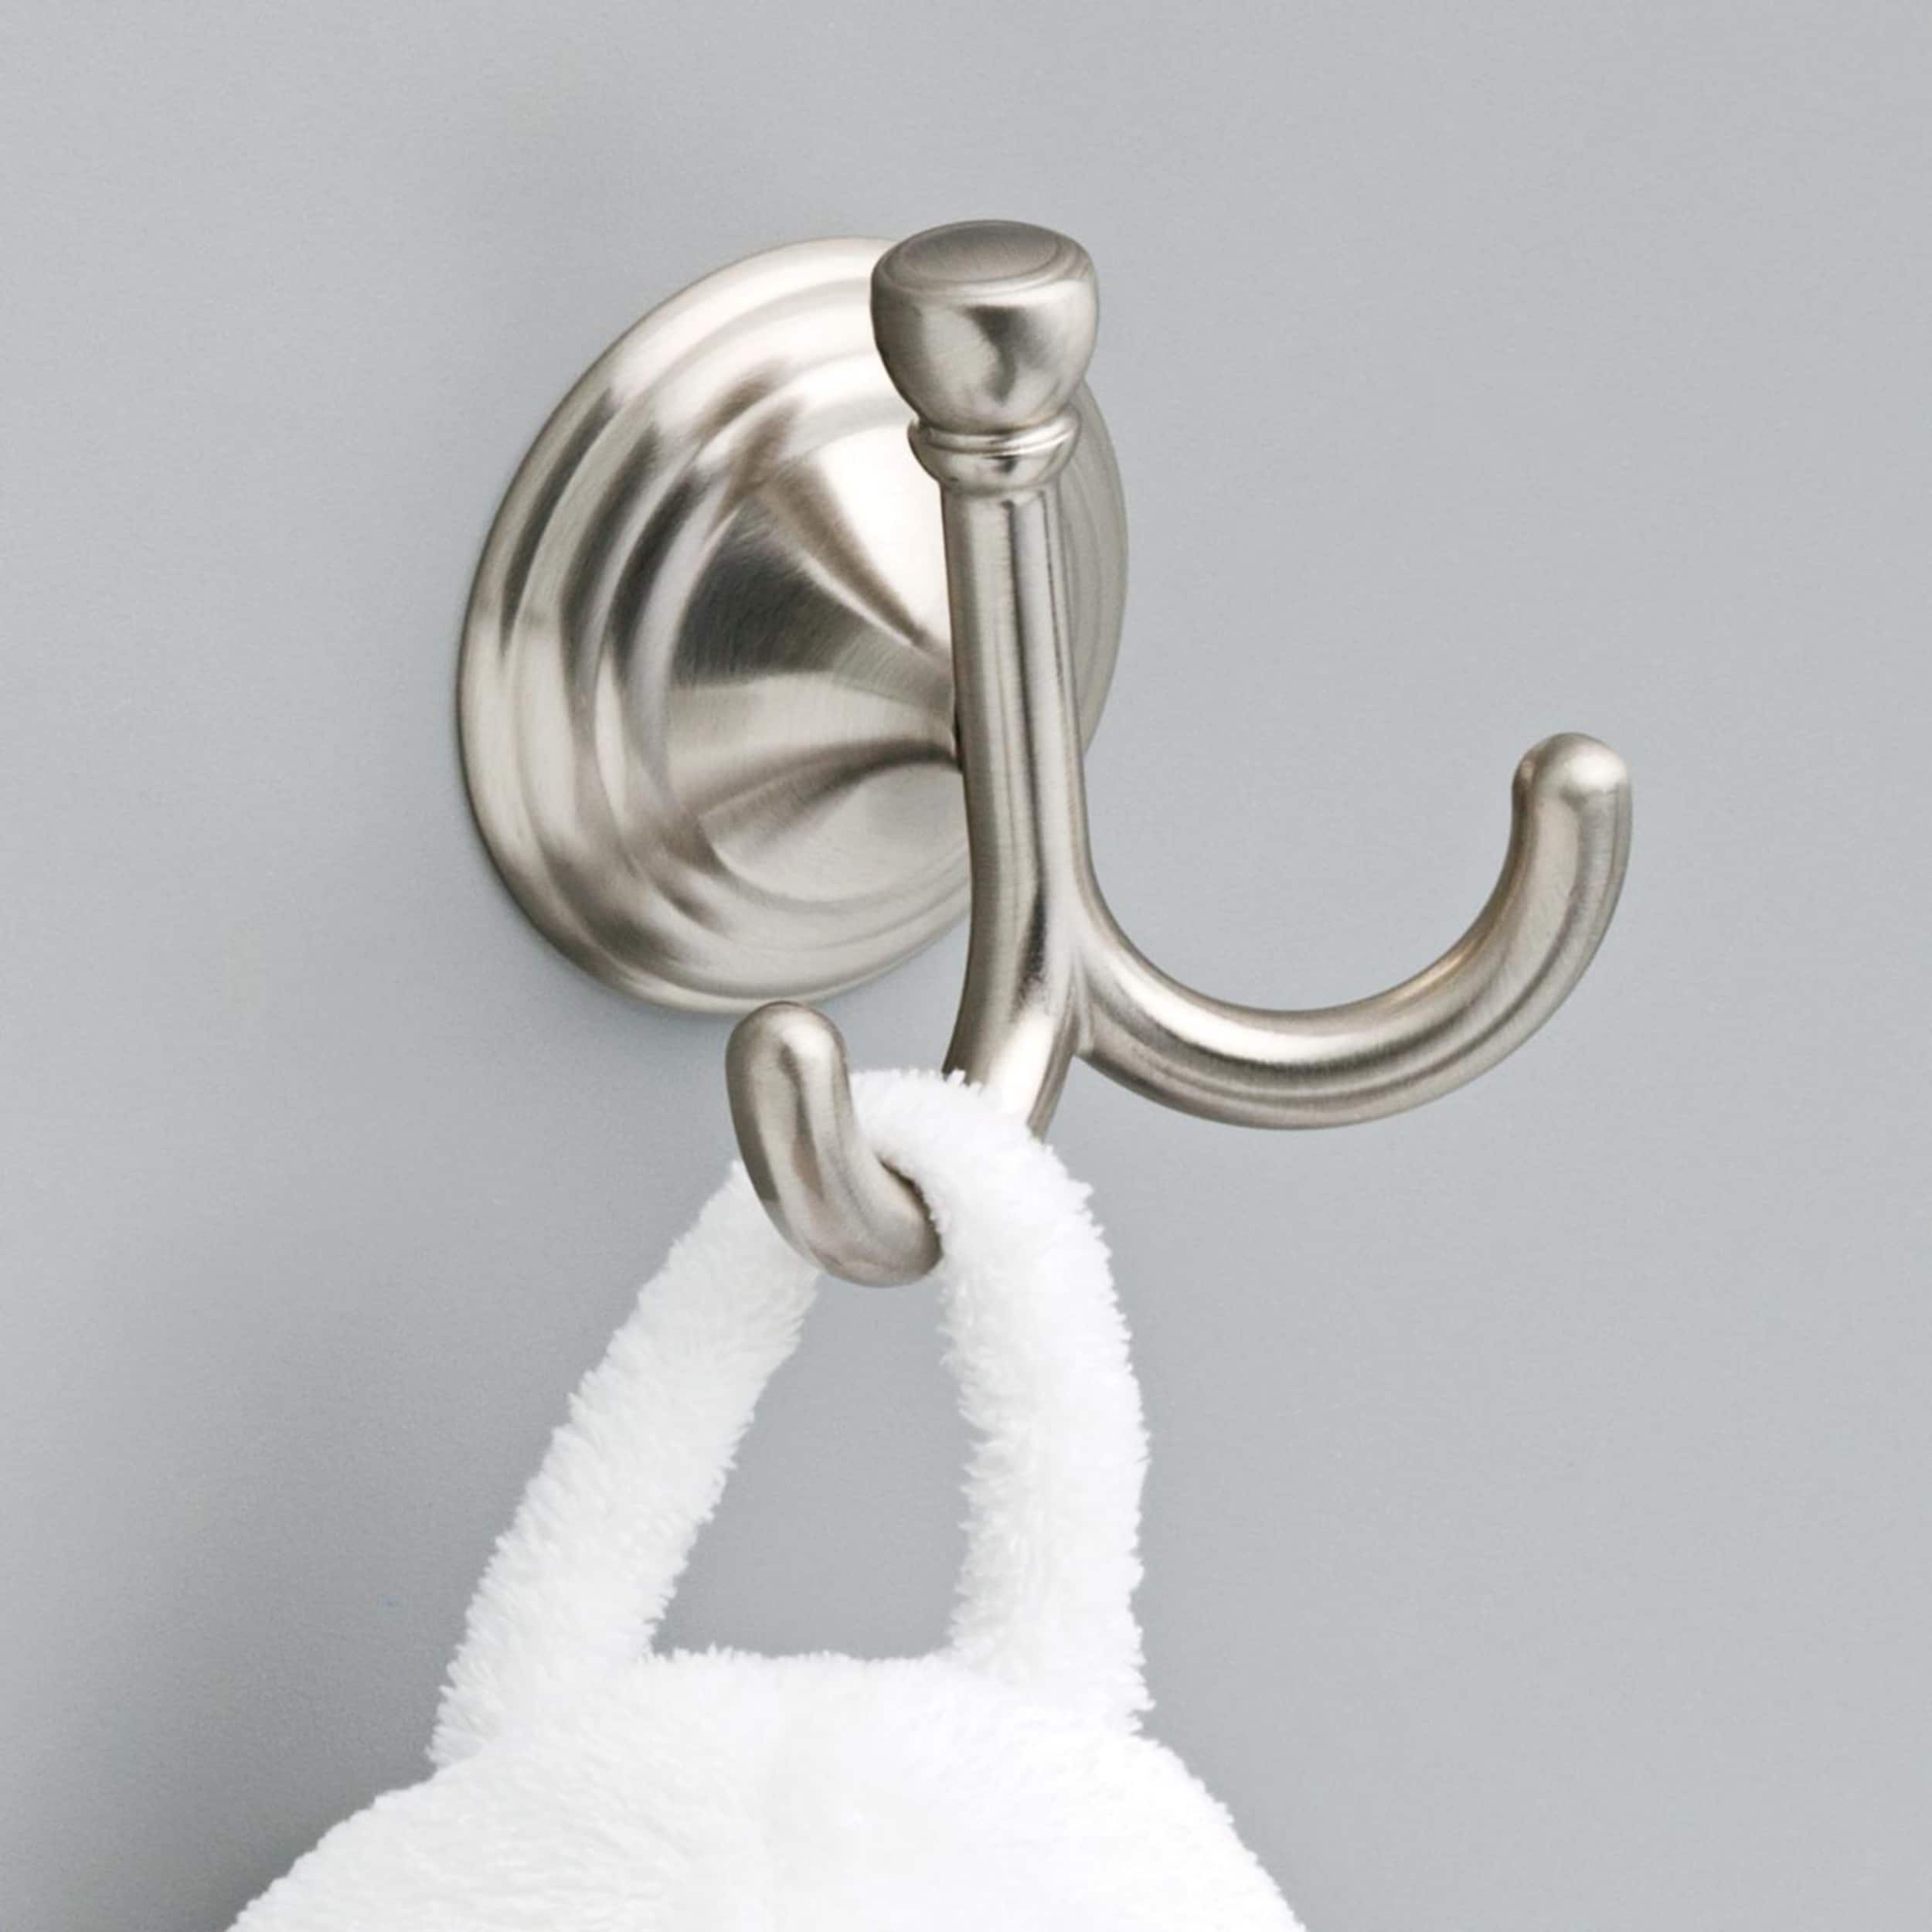 Stainless Steel Bathroom Hooks No Drill Silver Brushed